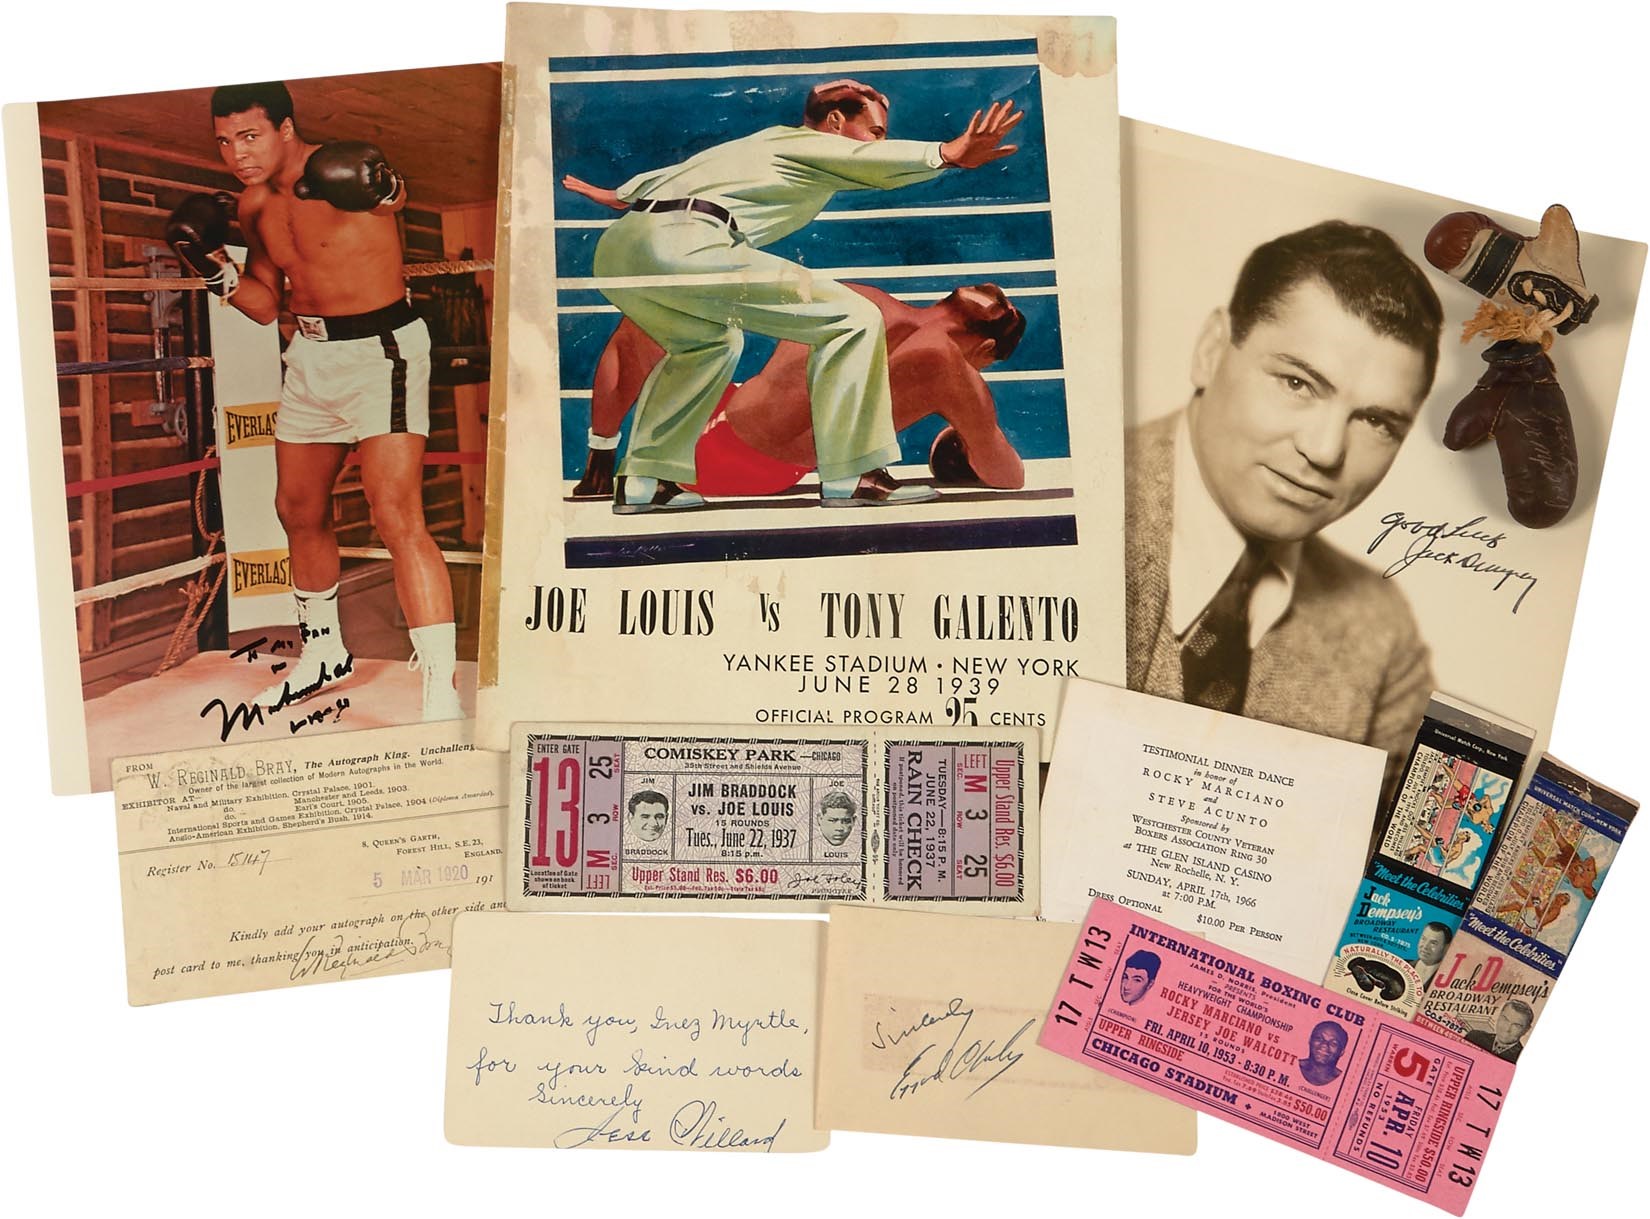 Muhammad Ali & Boxing - Boxing Legends Collection with Louis Program, Autographs & Tickets (12)